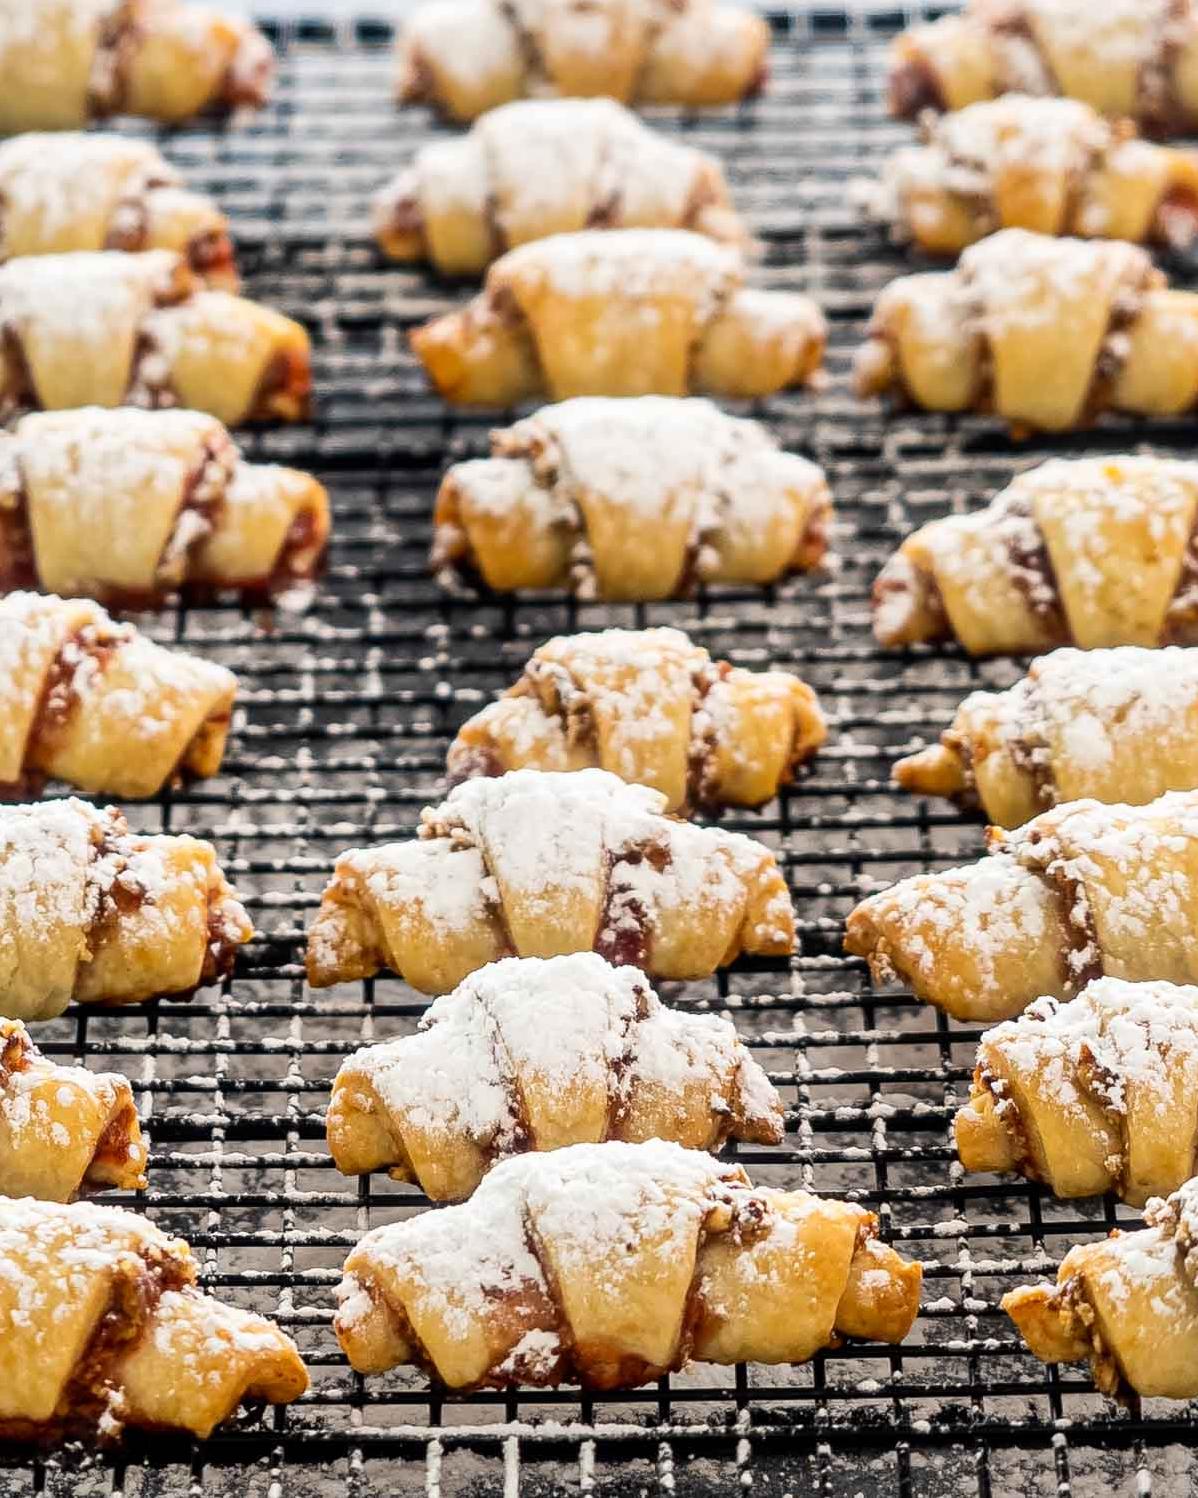  One bite of Mimi's Frozen Dough Rugelach and you'll be transported to dessert heaven.